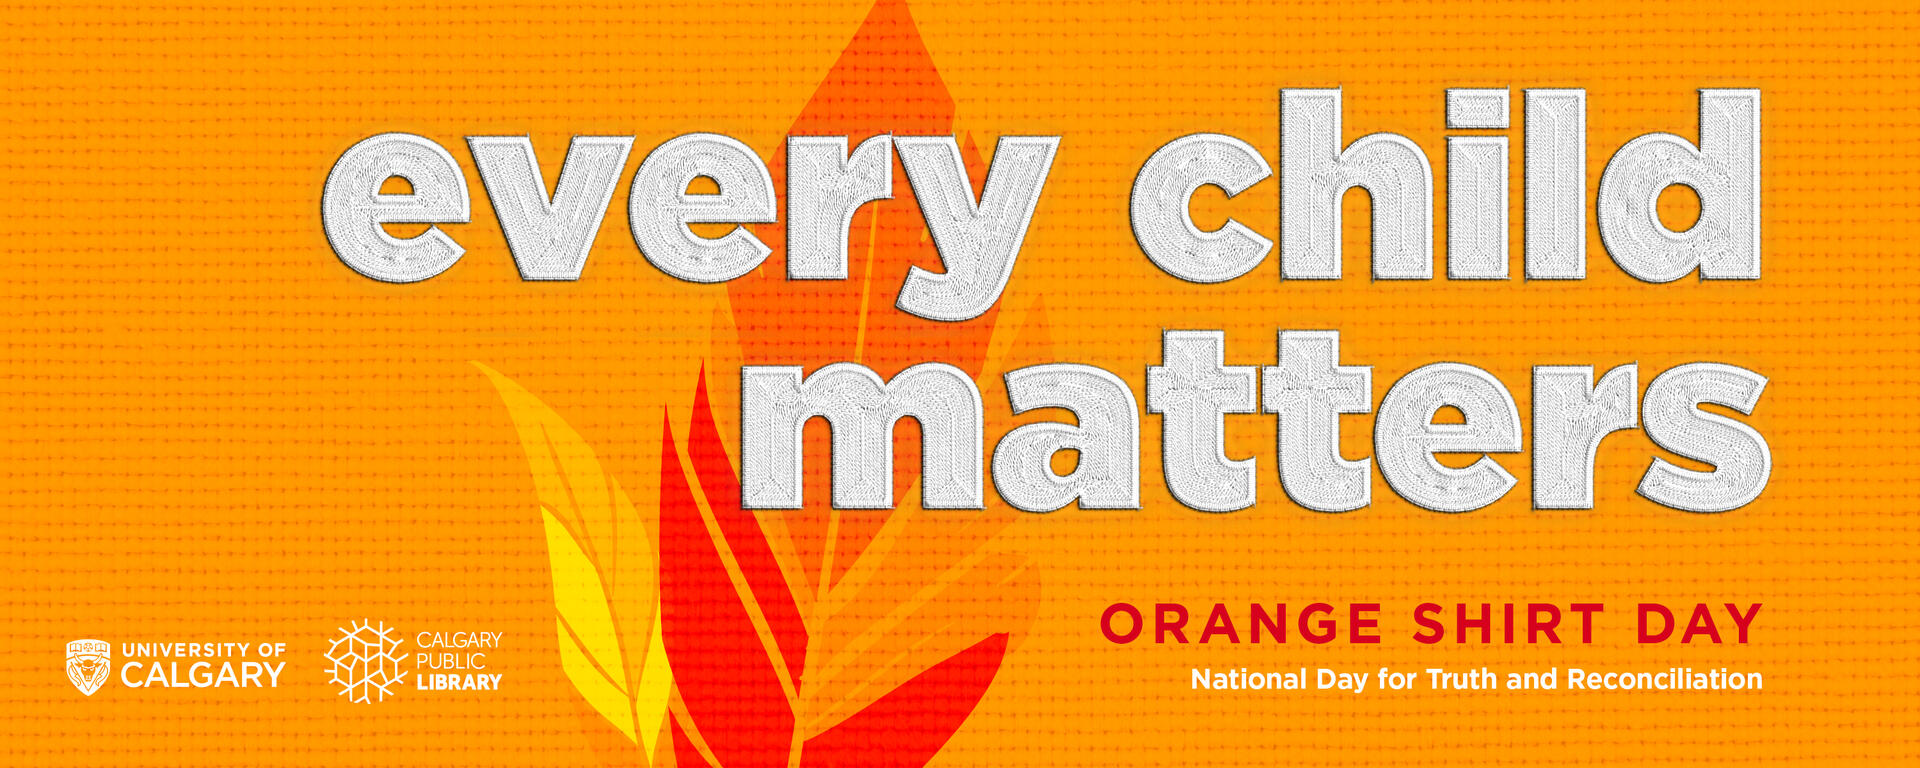 White letters on an orange background with a feather motif. The teaxt reads "every child matters. Orange shirt day. National Day for Truth and Reconcilliation."